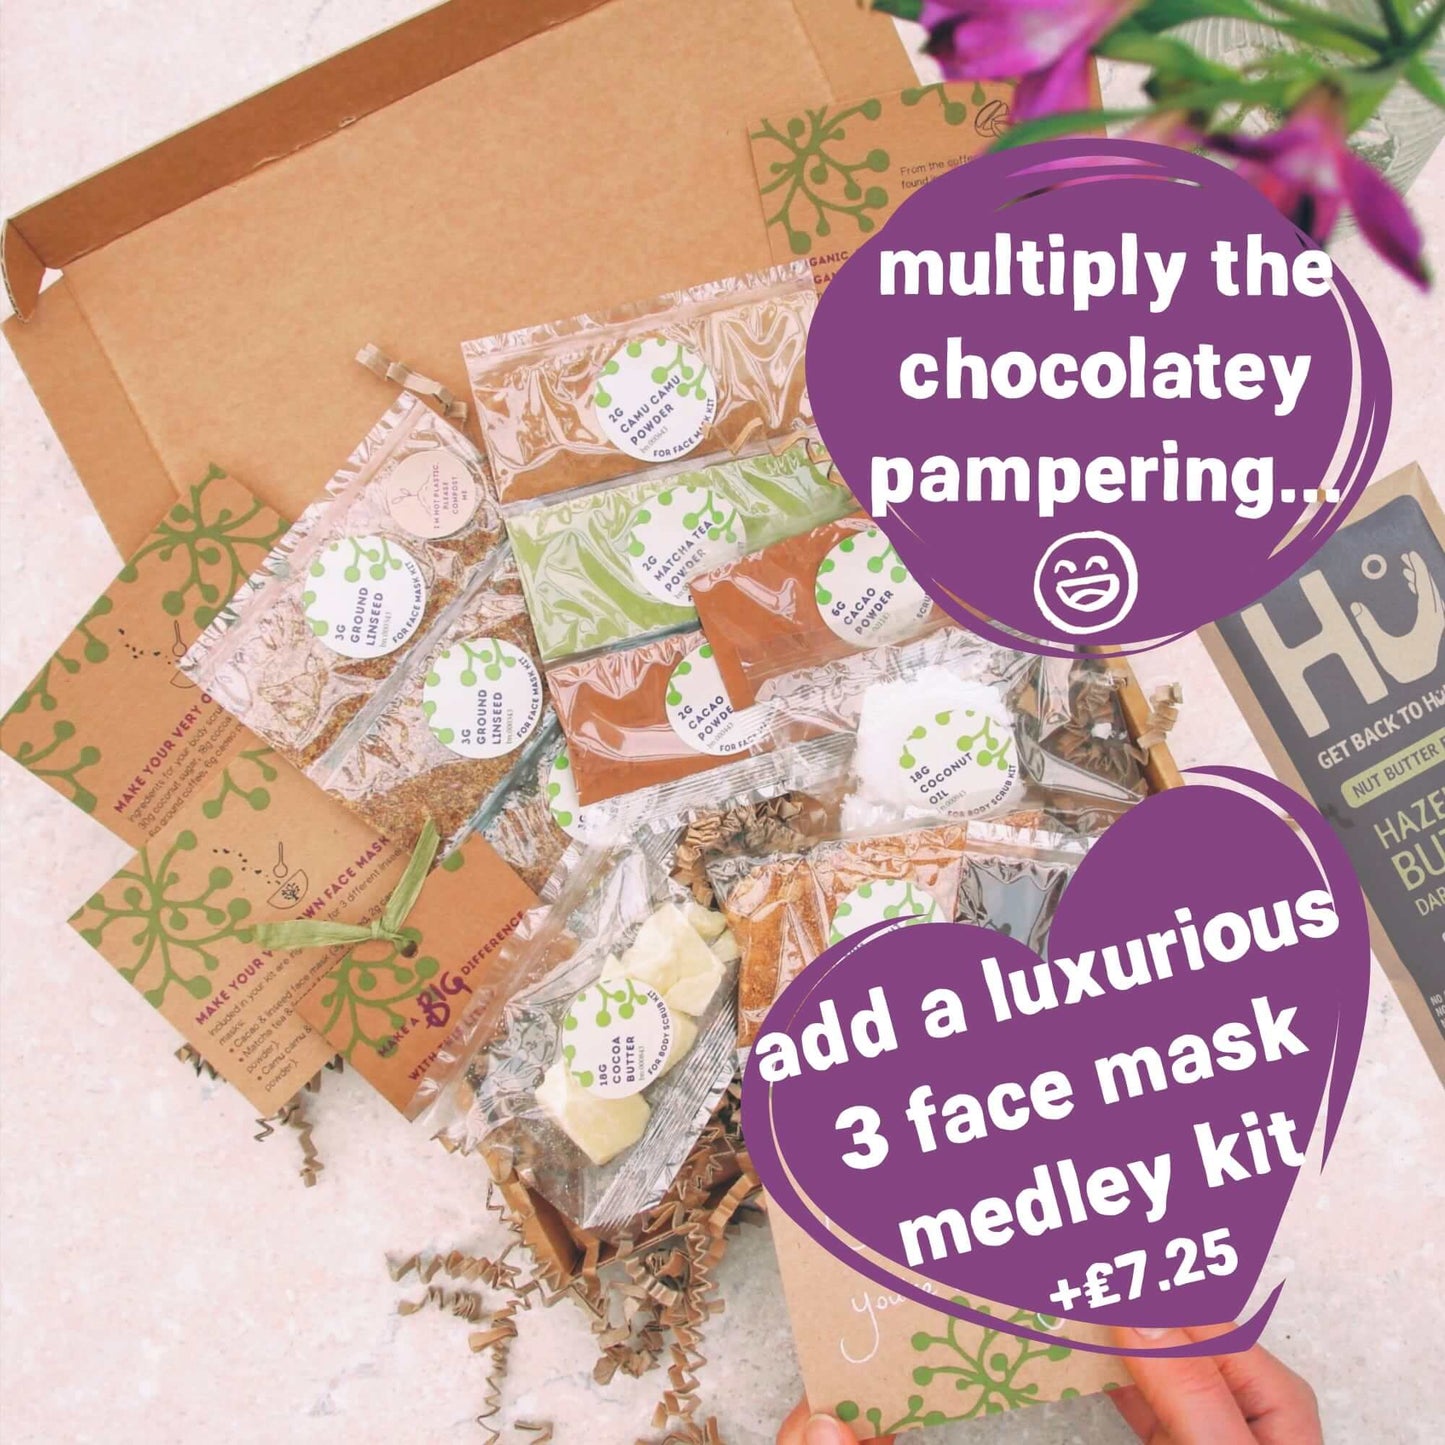 add eco-friendly face mask medley kit to birthday gift for sister